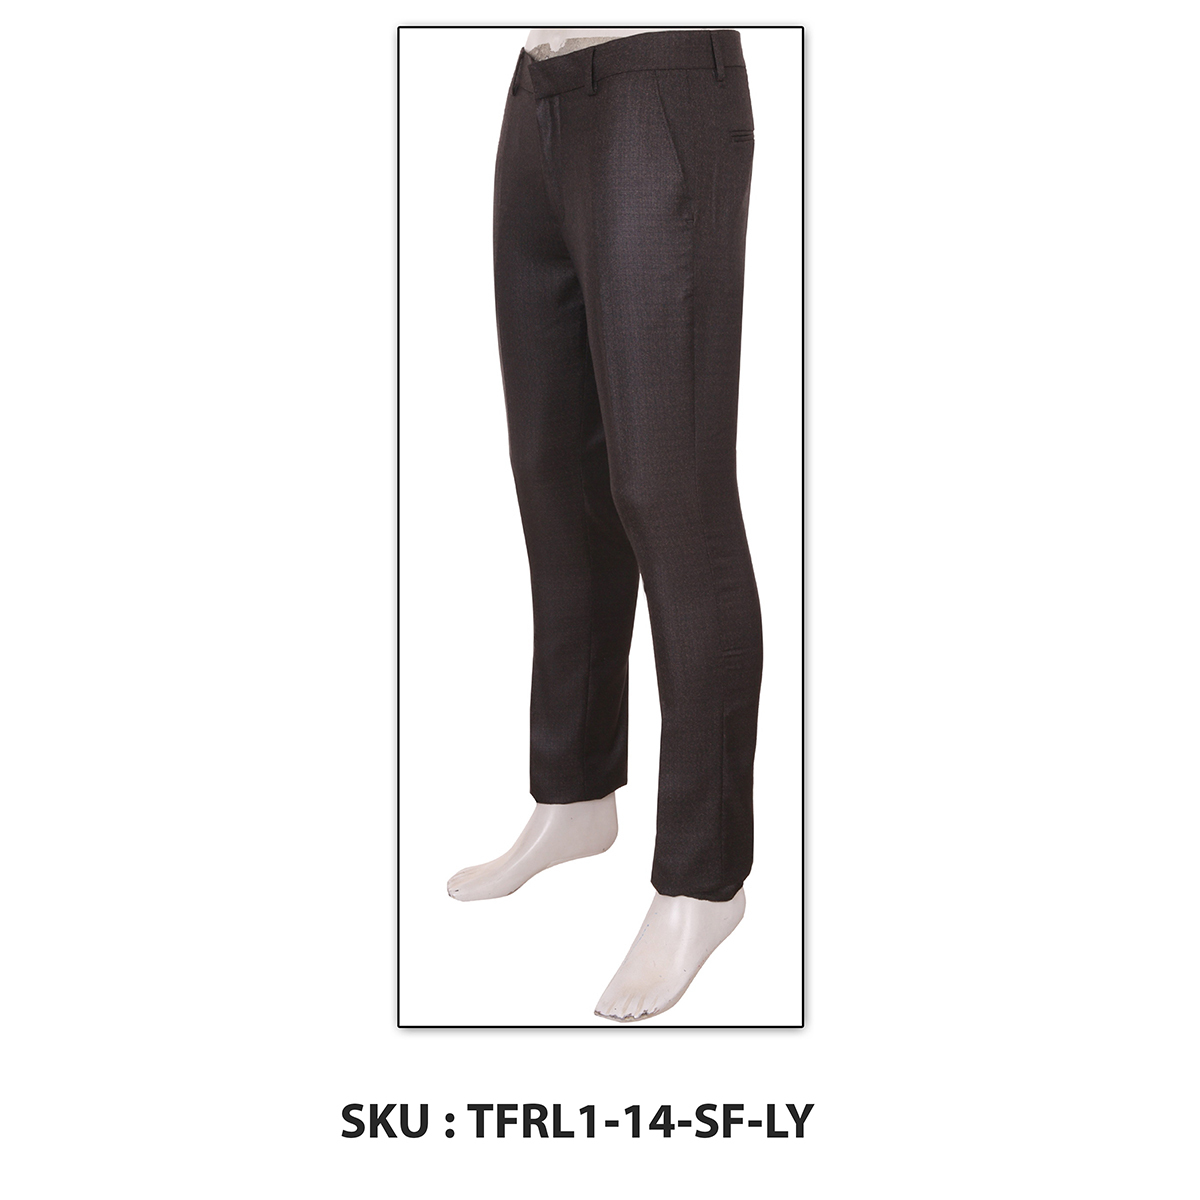 Classic Polo Mens Trousers Tfrl1-14-Sf-Ly Brown 32